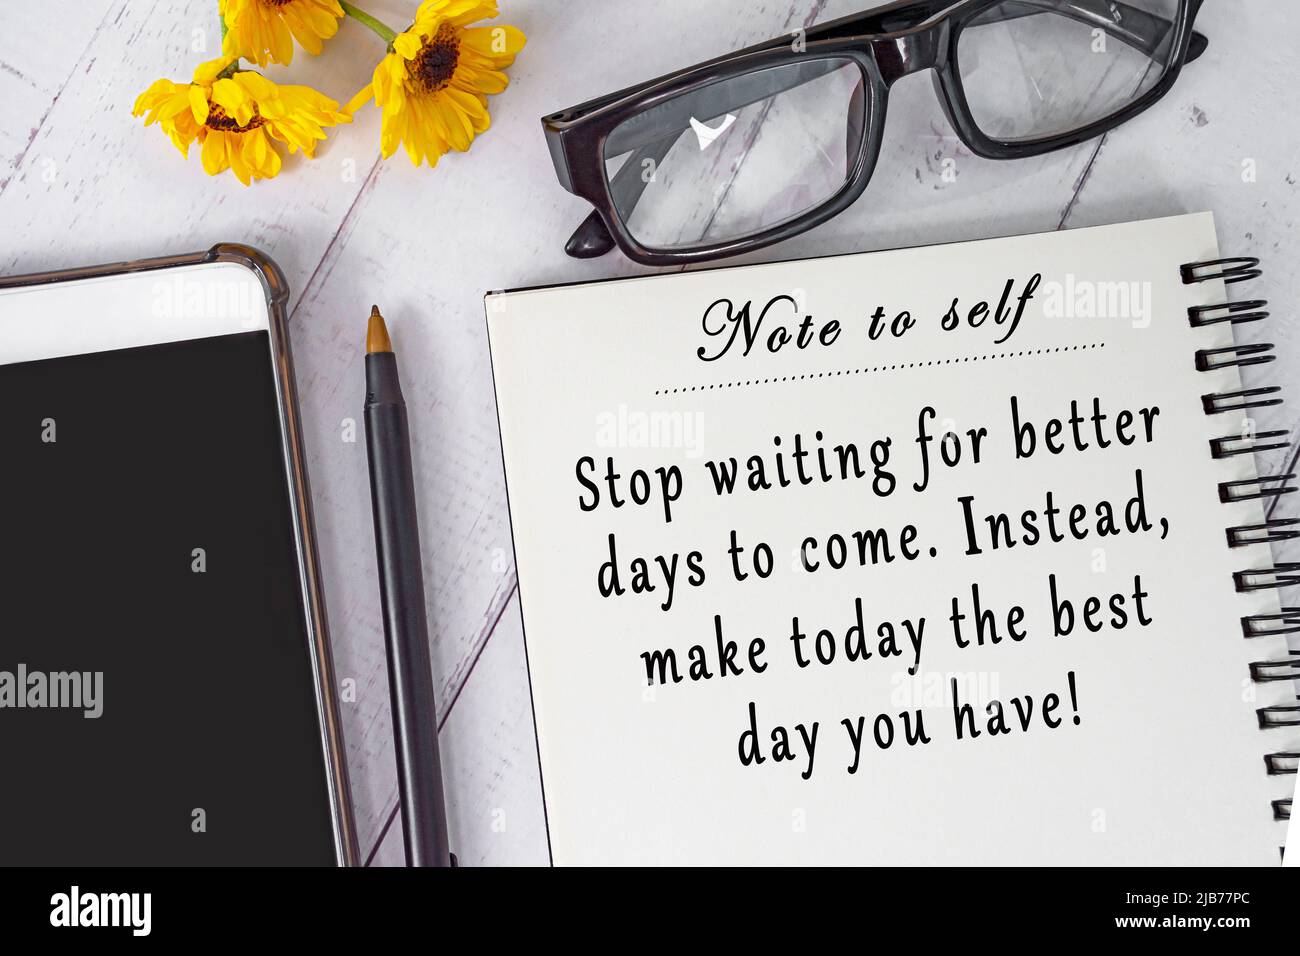 Motivational and inspirational quote on note book on wooden desk -Note to self, Stop waiting for better days to come, instead make today the best day Stock Photo